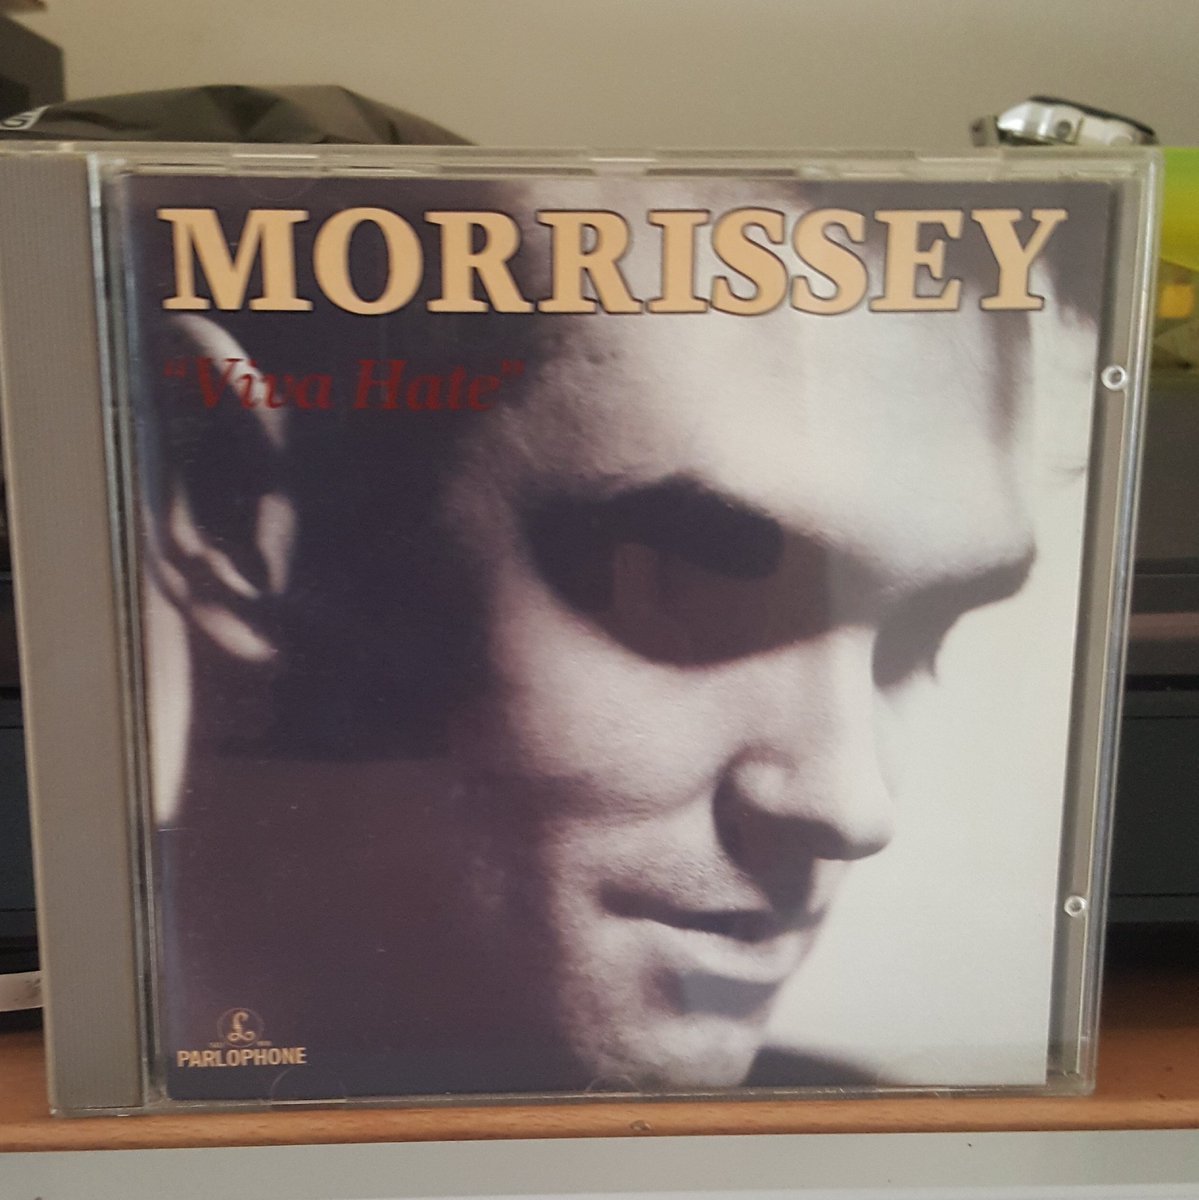 The perfect album for a Sunday afternoon.. 

#VivaHate #Morrissey #EverydayIsLikeSunday #Lockdown 
#StayHome